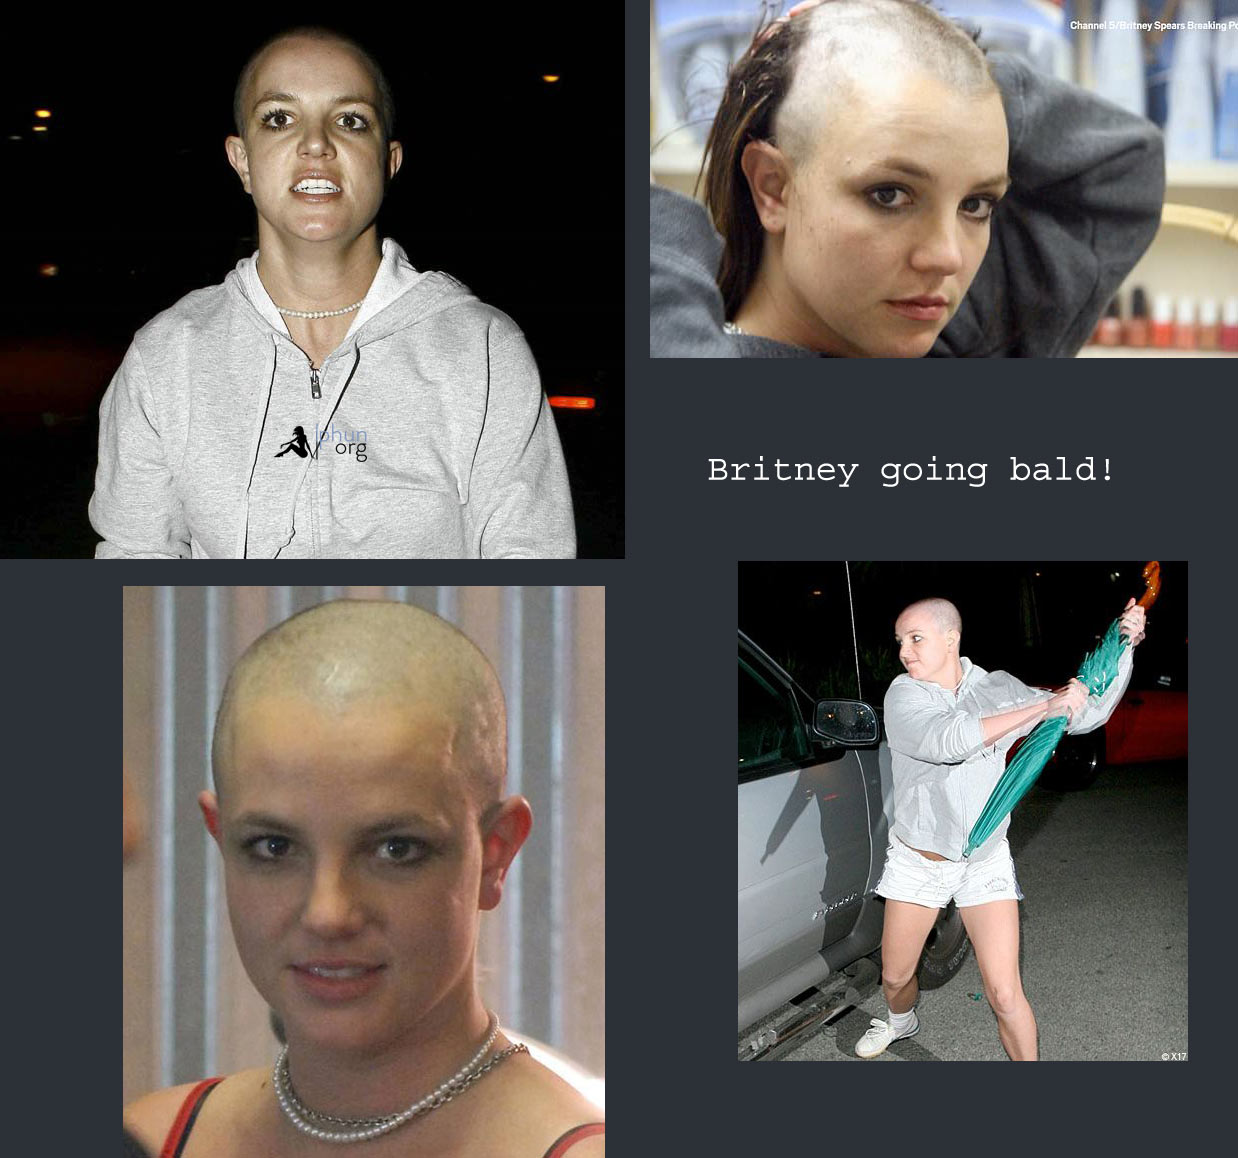 Britney going bald in the year 2007